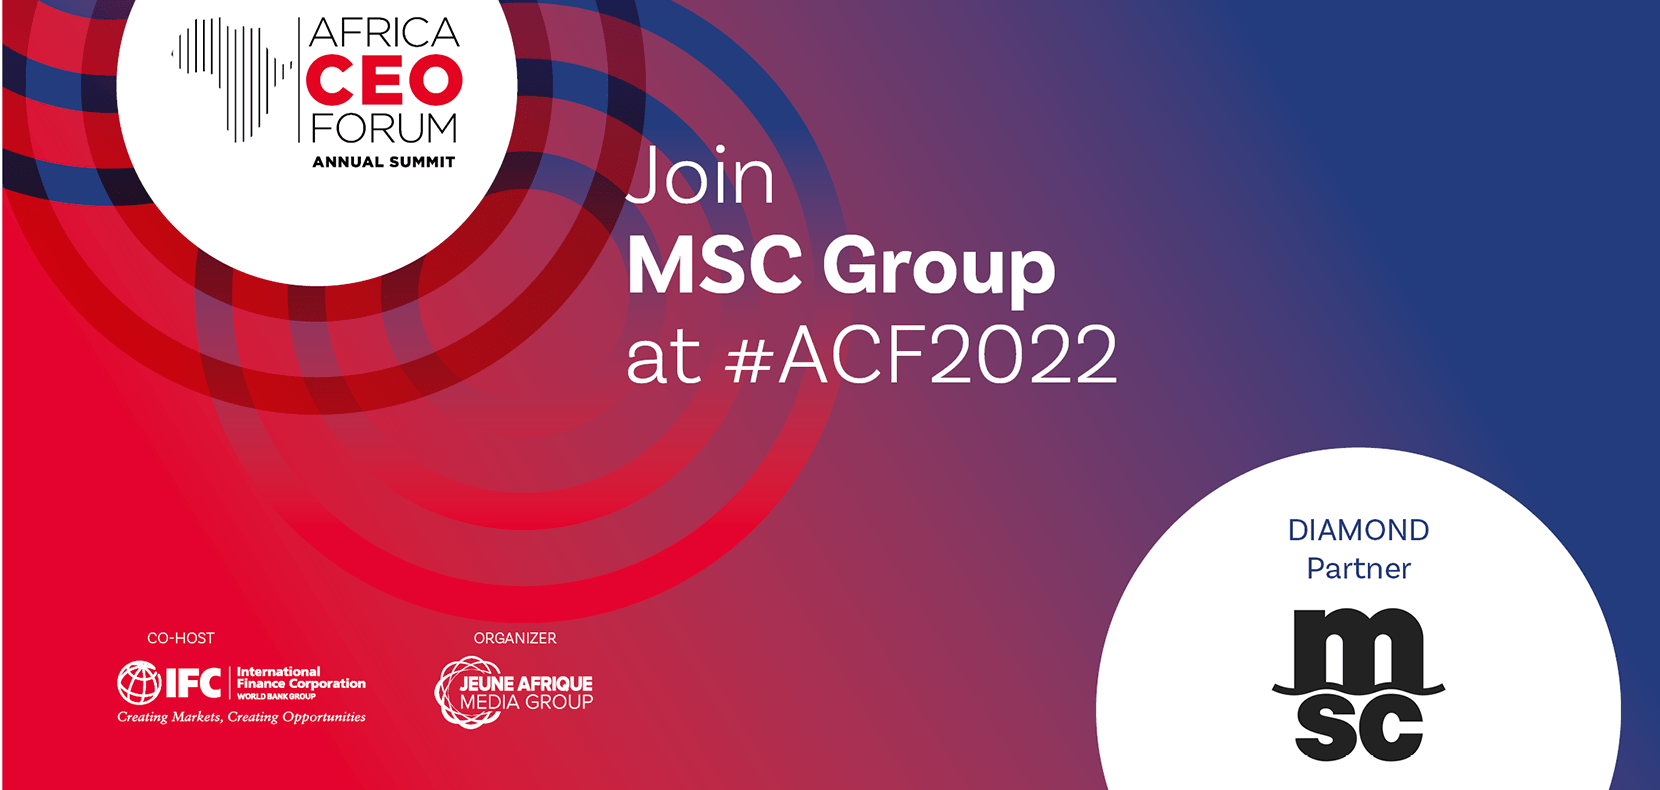 Join MSC Group at Africa CEO Forum 2022